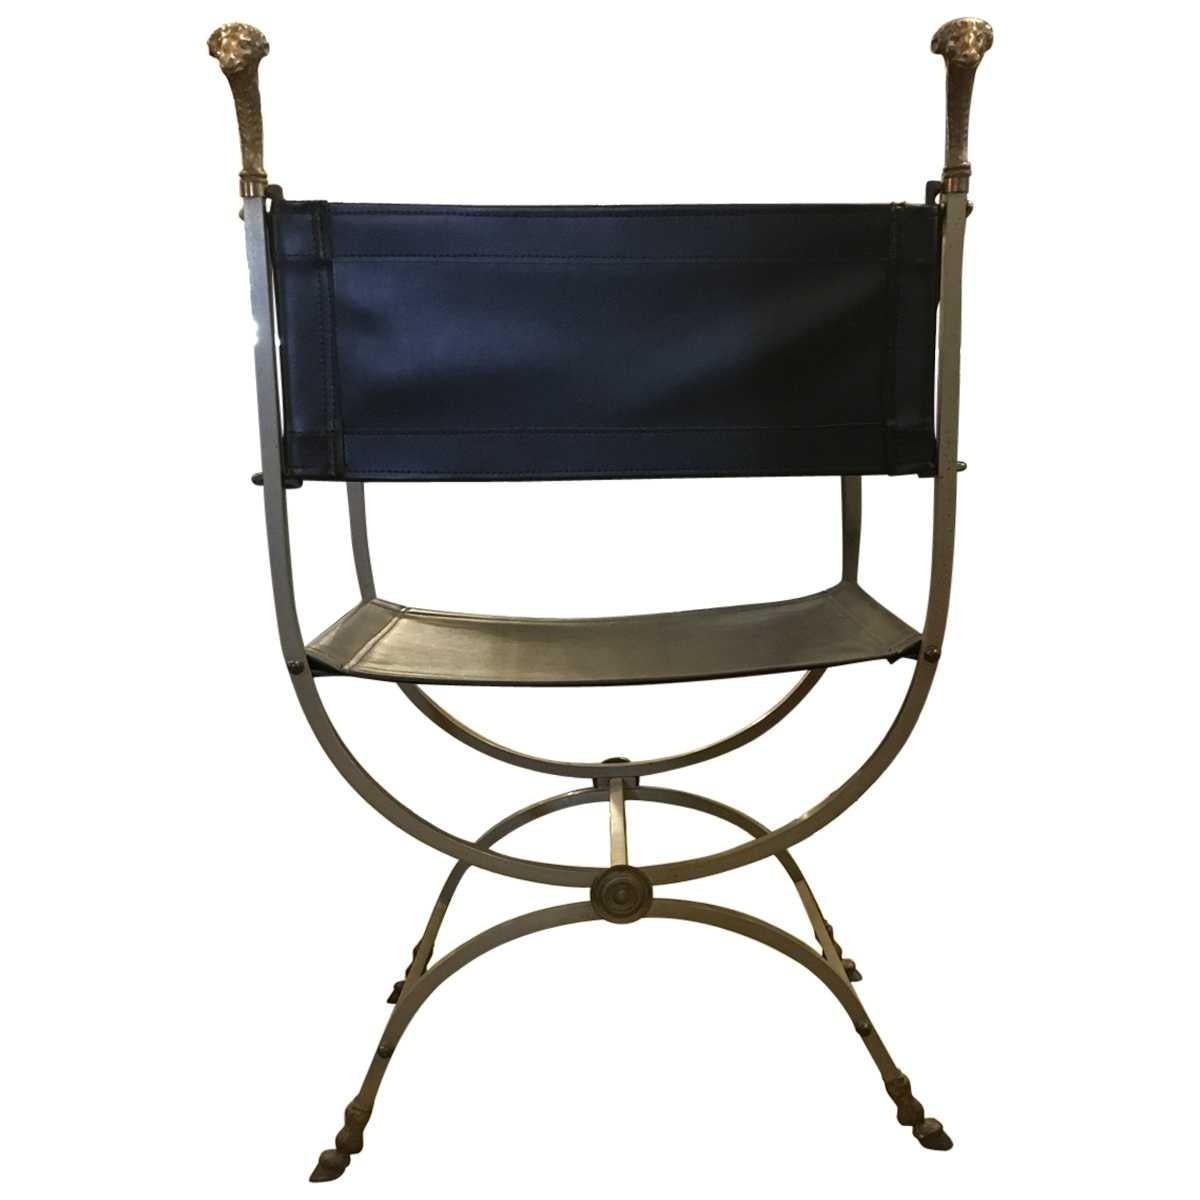 Other Italian Modern Midcentury Ram's Head Accent Chair For Sale